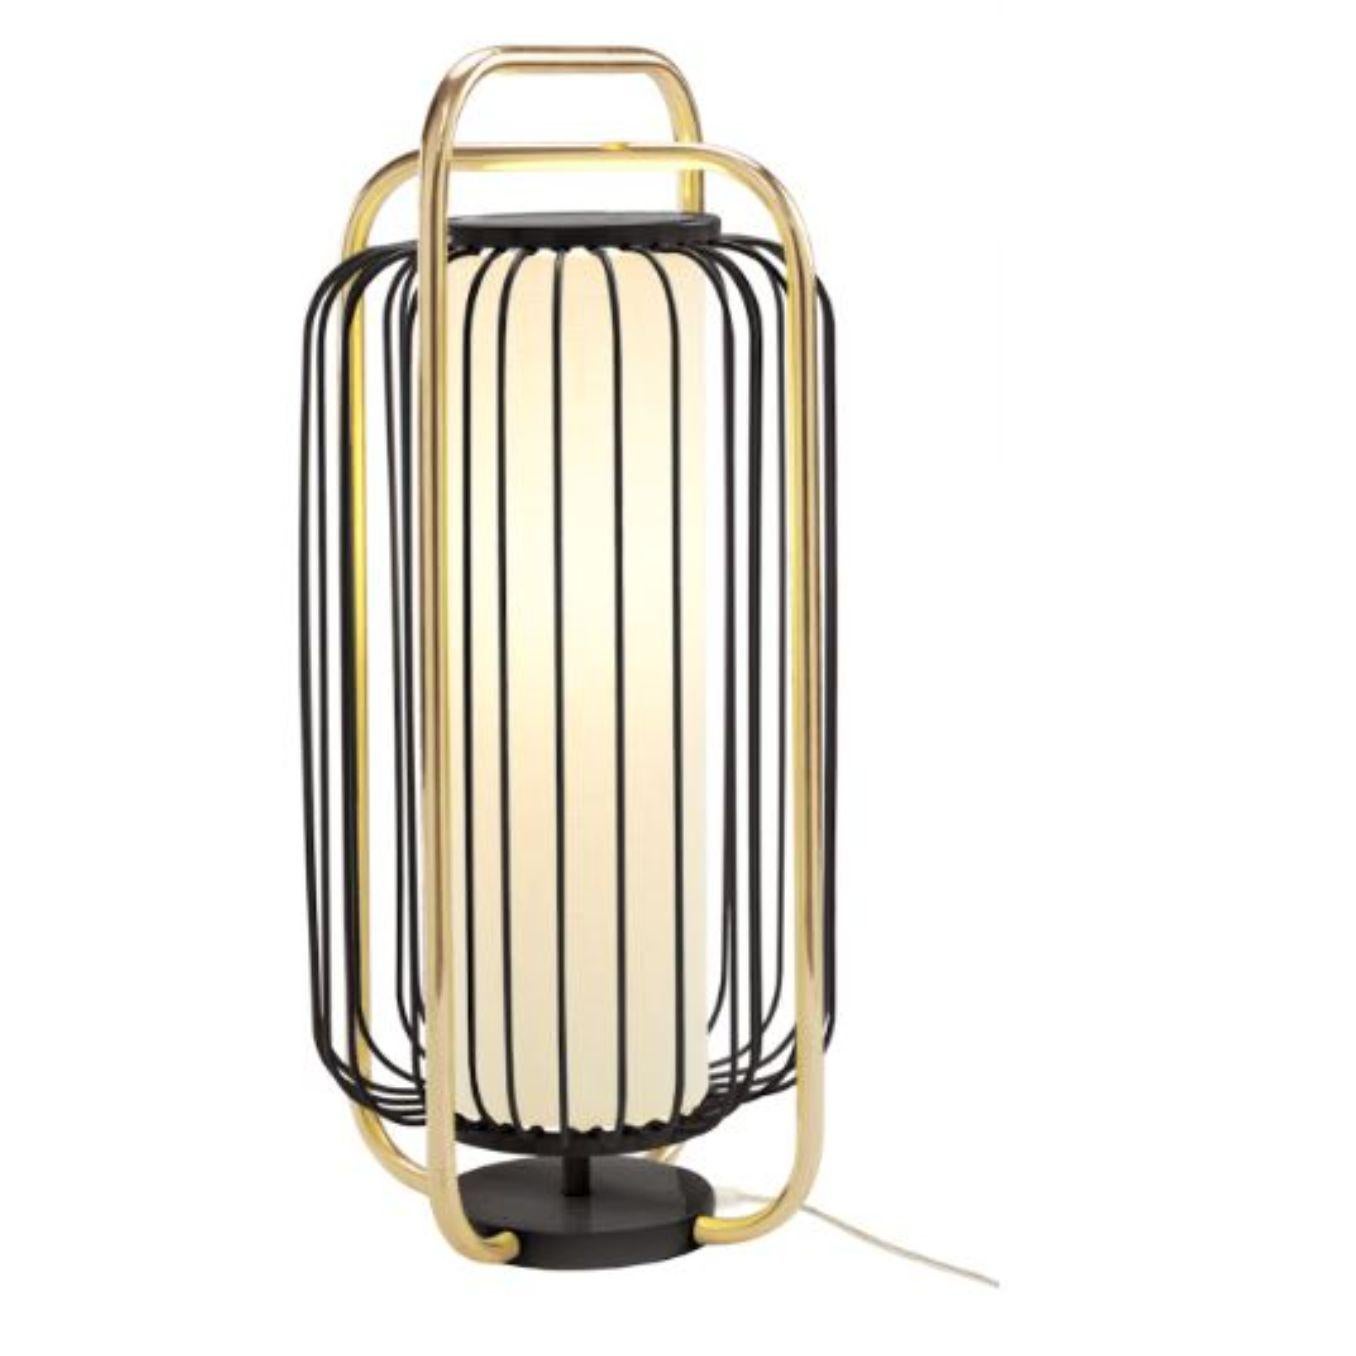 Brass and black Jules table lamp by Dooq
Dimensions: W 30 x D 30 x H 63 cm
Materials: lacquered metal, polished or brushed metal, brass.
abat-jour: cotton
Also available in different colours and materials.
    